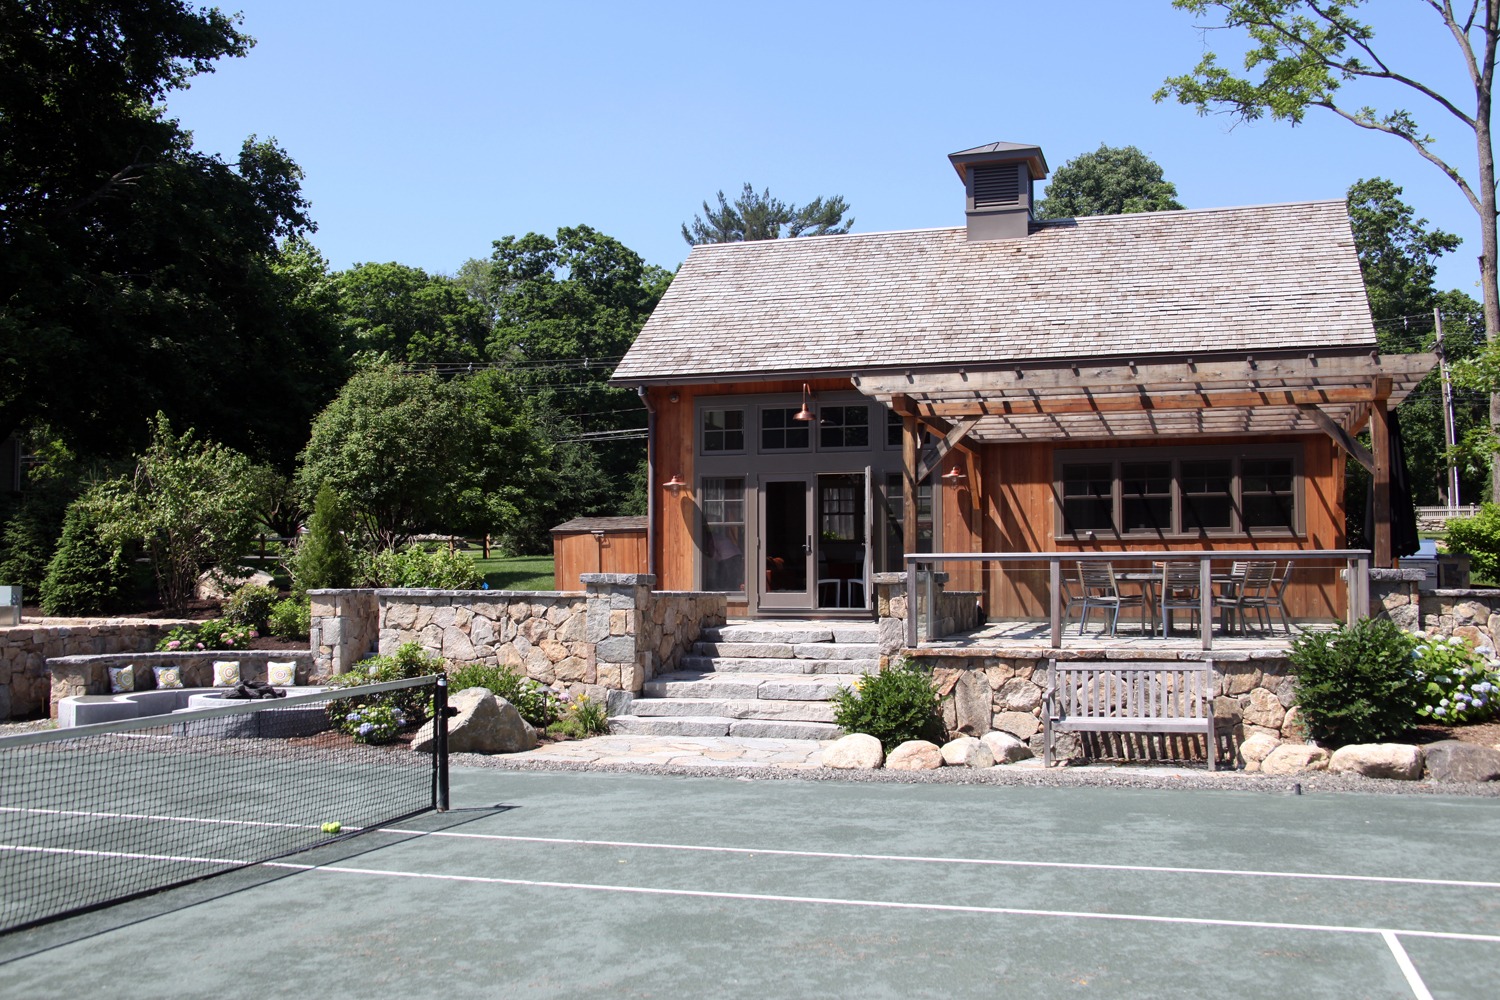 A rustic building with a cedar shake roof sits beside a tennis court, featuring stone stairs, landscaping, and a clear blue sky overhead.